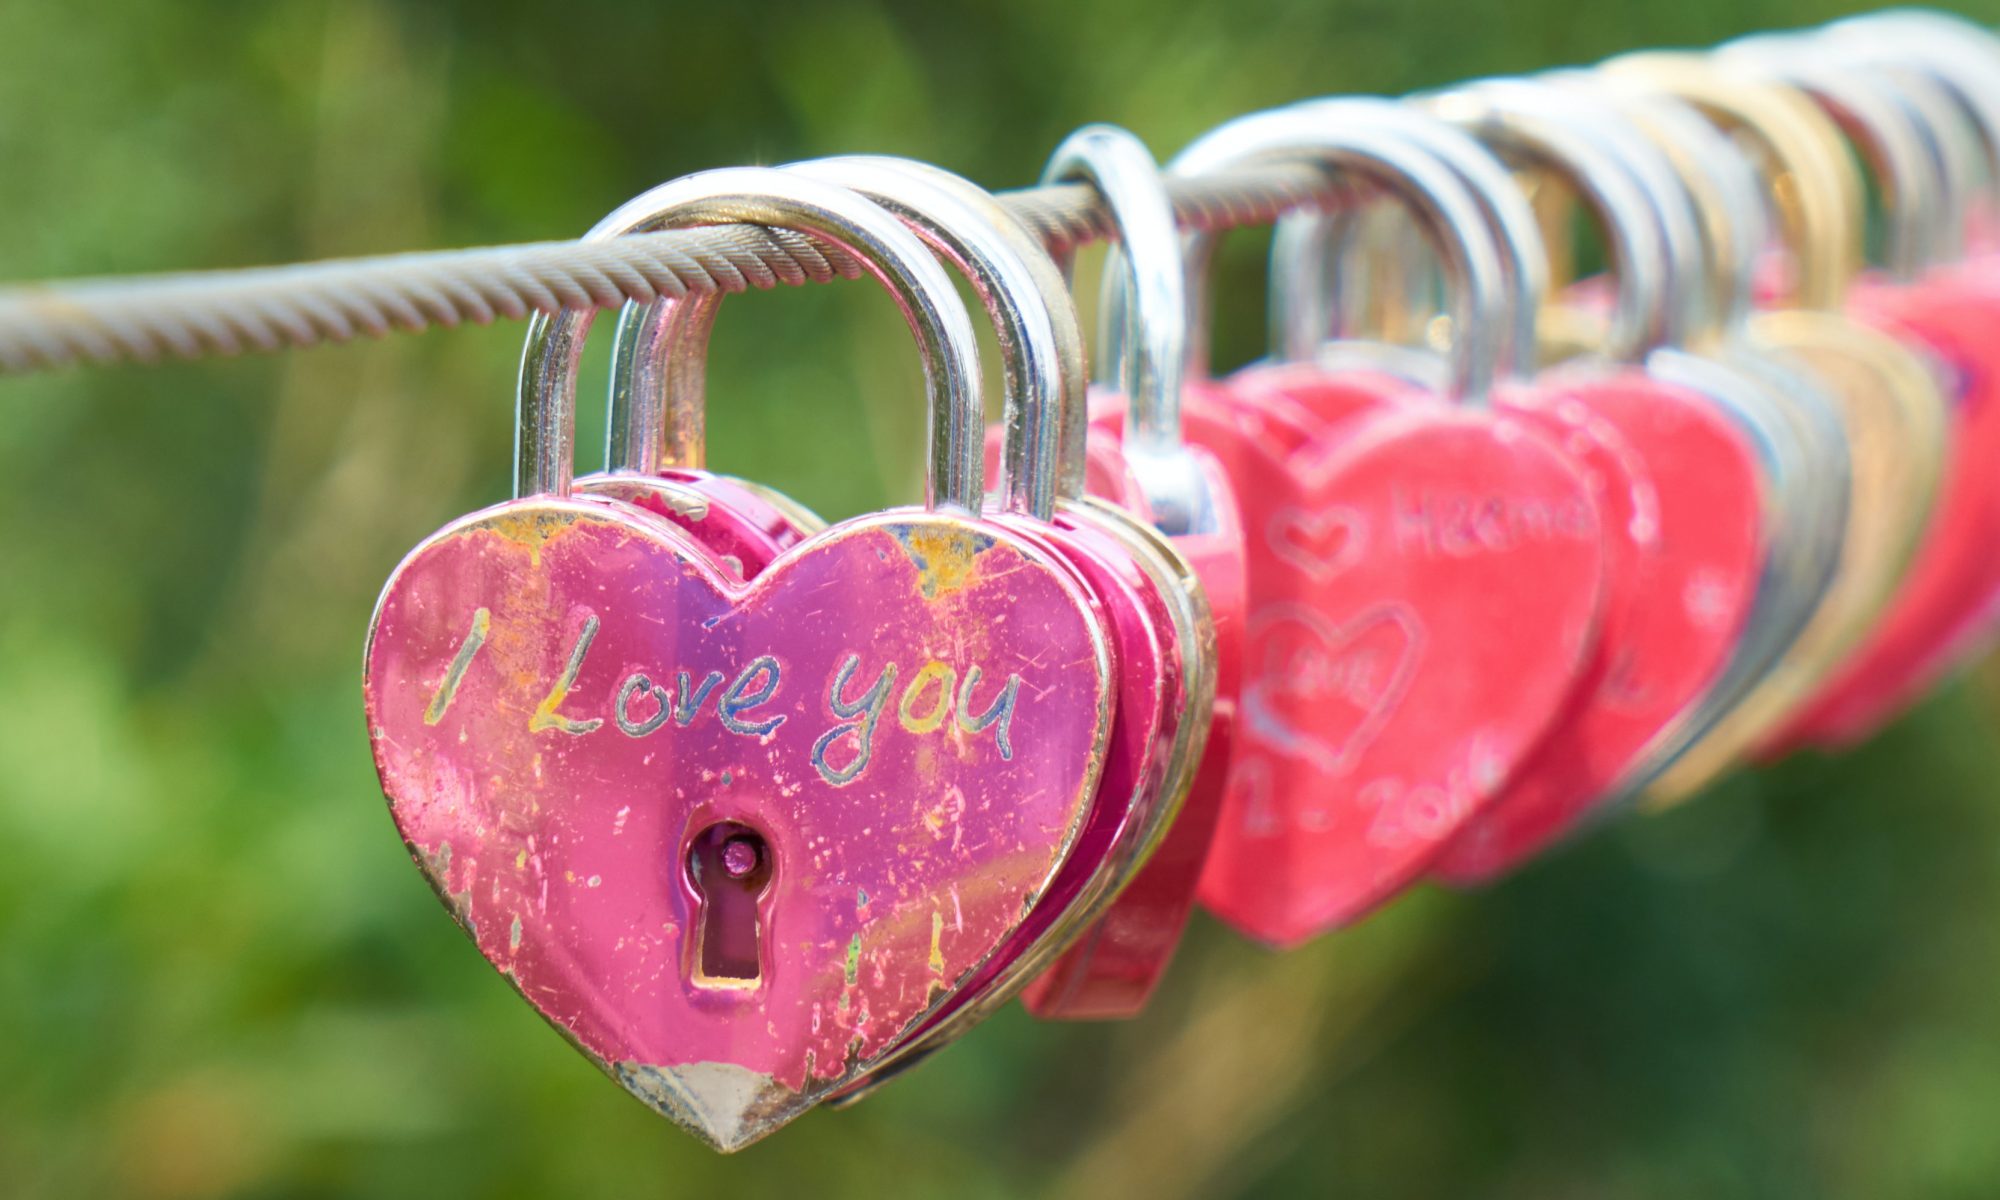 pink-red-heart-shaped-i-love-you-locks-hang-on-cable-engin-akyurt-on-unsplash